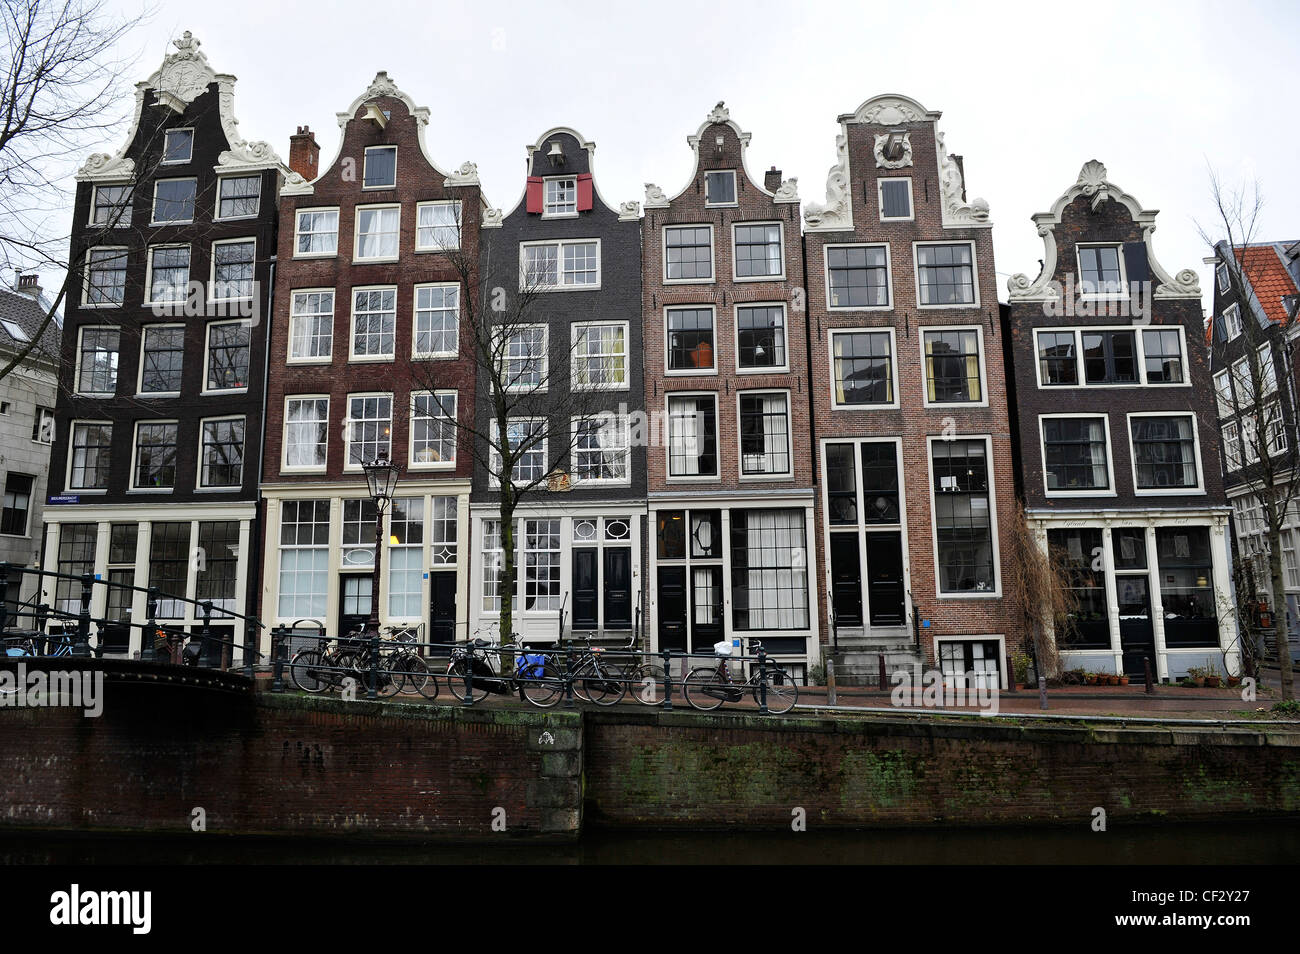 Typical Amsterdam buildings on the banks of a canal. Stock Photo